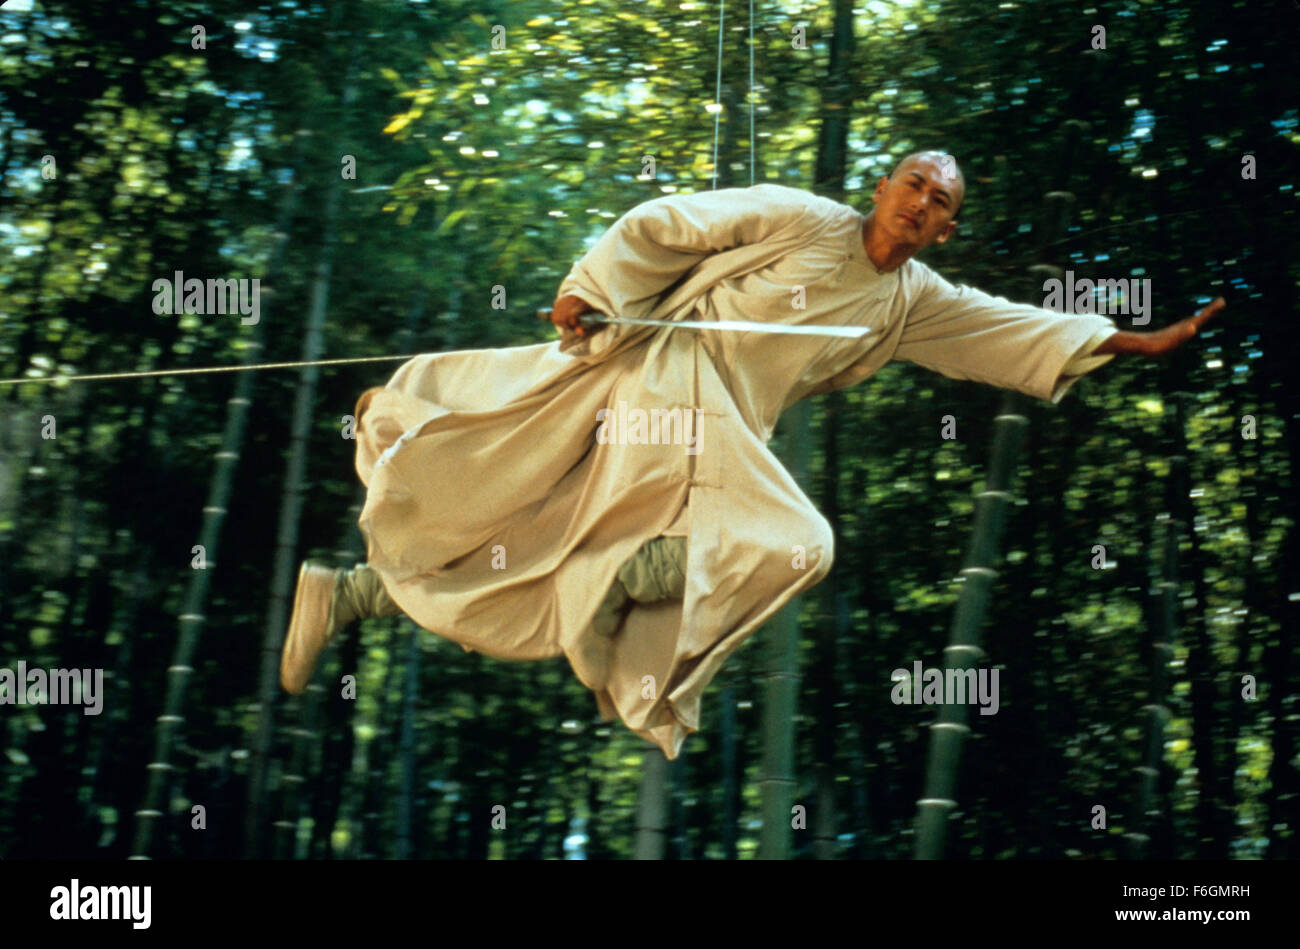 RELEASE DATE: December 22, 2000. MOVIE TITLE: Crouching Tiger Hidden Dragon. STUDIO: United China Vision. PLOT: The disappearance of a magical jade sword spurs a breathtaking quest for the missing treasure. Li is embittered by the loss of his jade sword, and his unrequited pursuit of Yu is further complicated by the mysterious intrusion of an assassin. The identity of the assassin is gradually unveiled as another poignant tale of love begins to ravel with that of Li and Yu against the backdrop of Western China's magnificent landscape. PICTURED: YUN-FAT CHOW as Master Li Mu Bai. Stock Photo